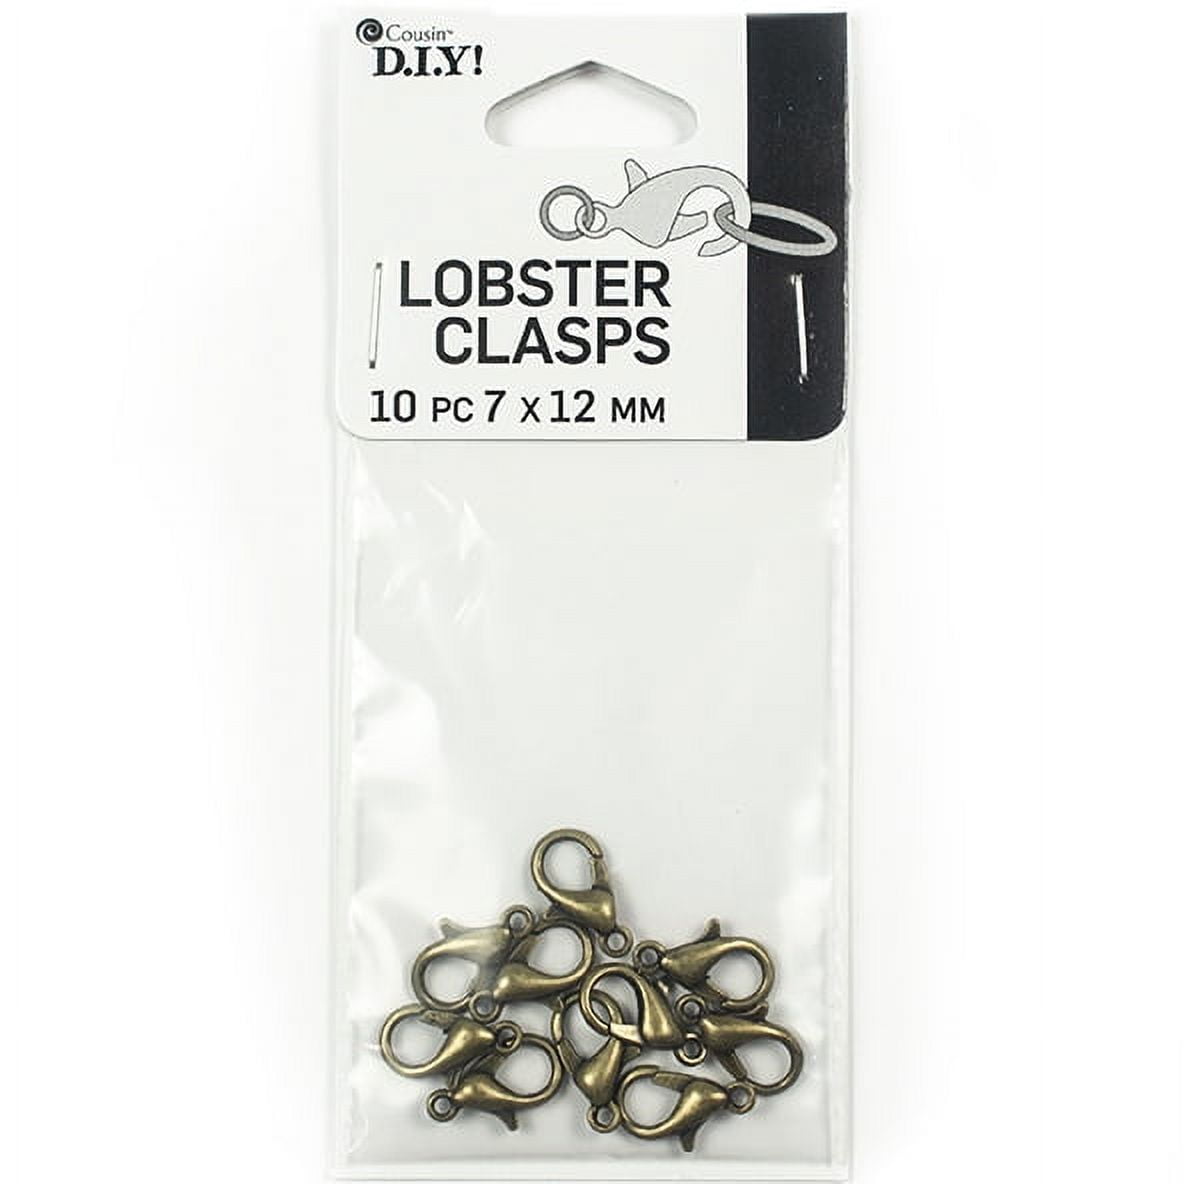 Cousin DIY Gold Metal Lobster Clasps, 10 Piece 